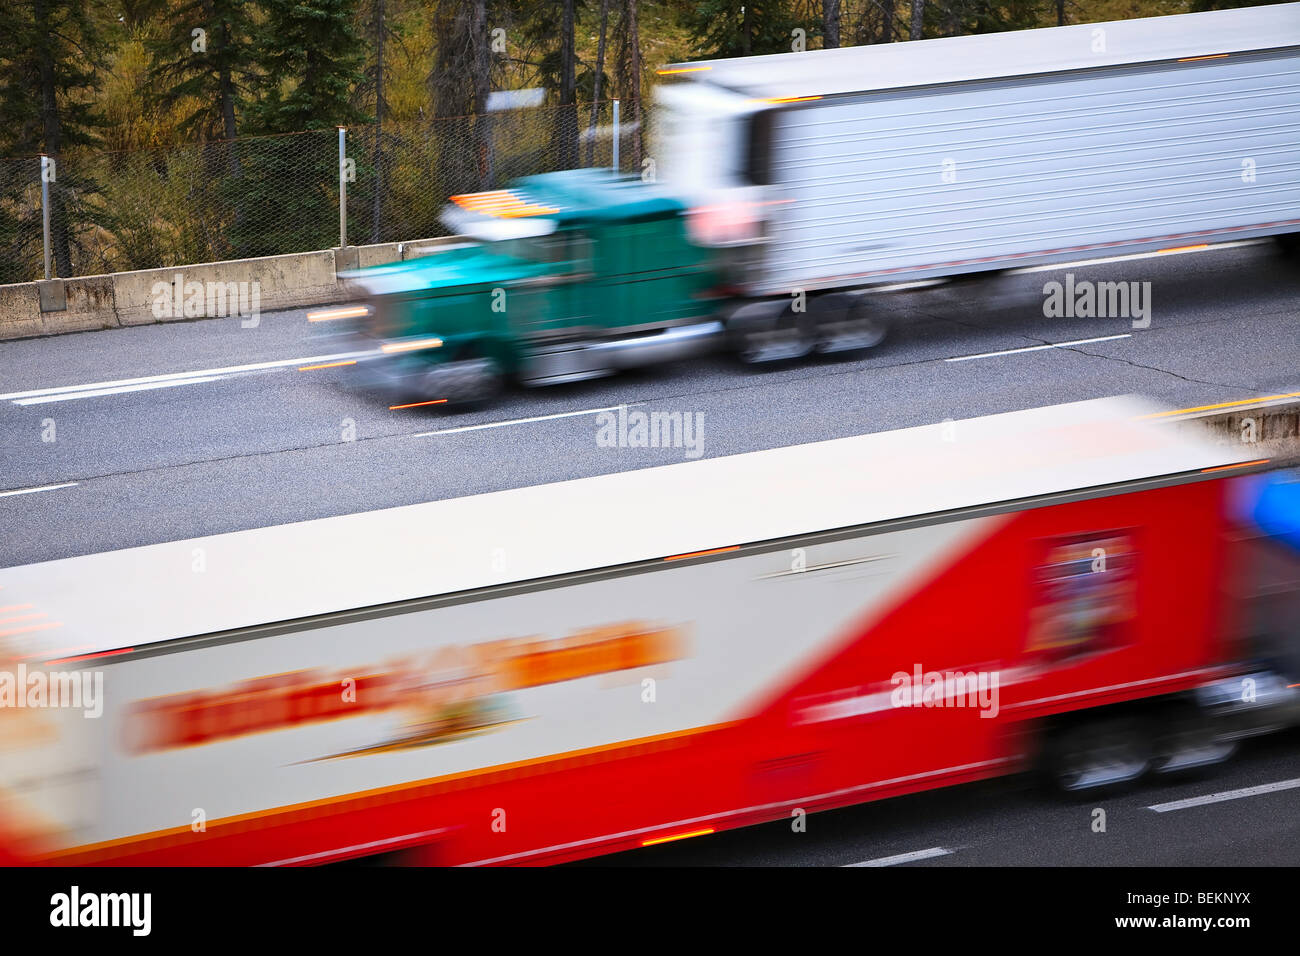 Motion blurred image of a transport trucks on the Trans-Canada Highway, Banff National Park, Alberta, Canada. Stock Photo